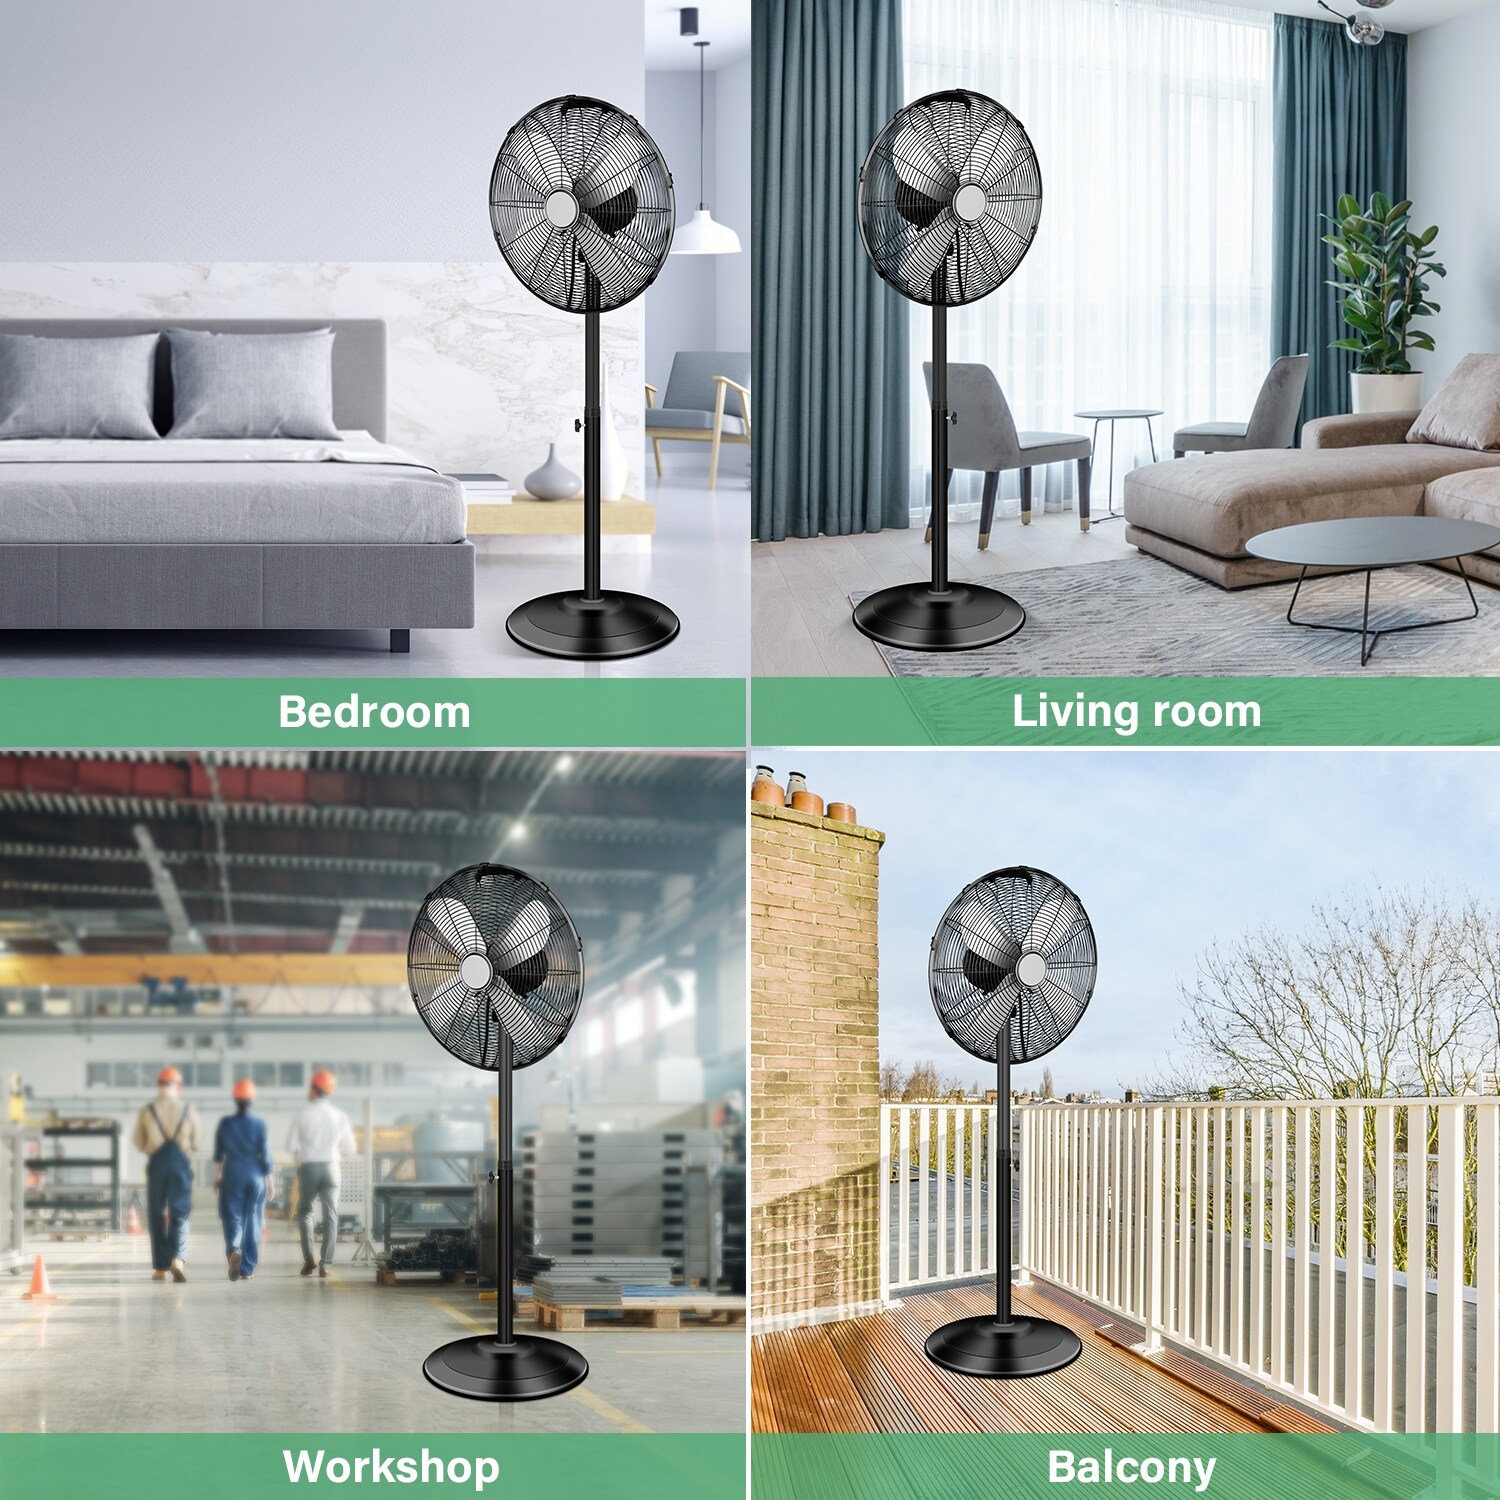 16 Inch High Velocity Stand Fan, Adjustable Heights, 75 Degree Oscillating, Low Noise, Quality Made Fan with 3 Settings Speeds